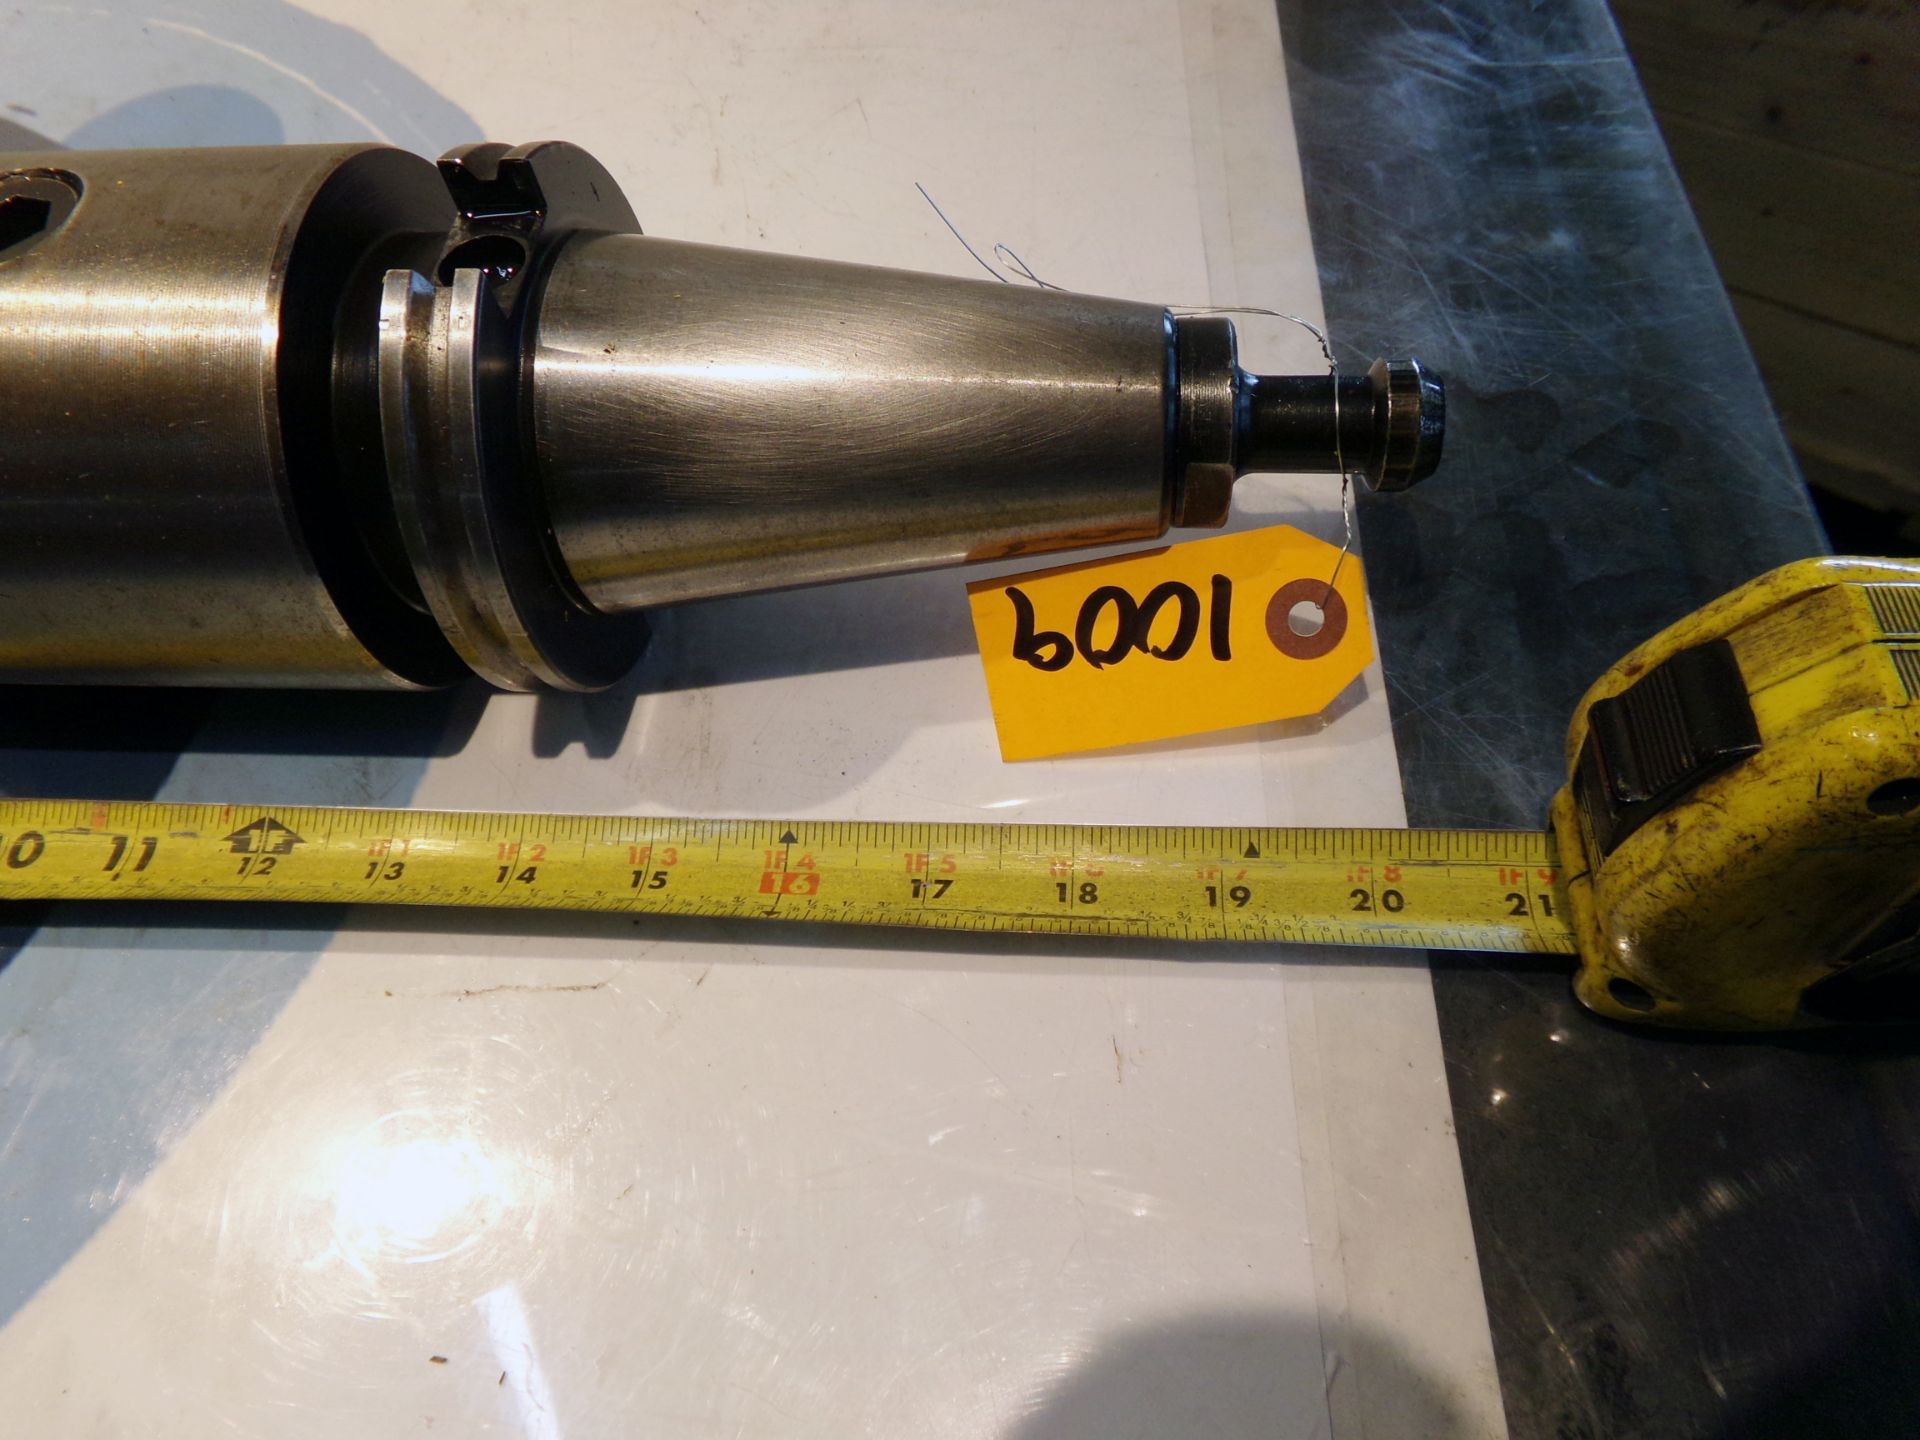 LARGE ID BORING TOOL CAT50 HOLDER WITH RET KNOB (4.0 EST BORE , ALMOST 14" TO TOOLHOLDER FACE) - Image 2 of 11